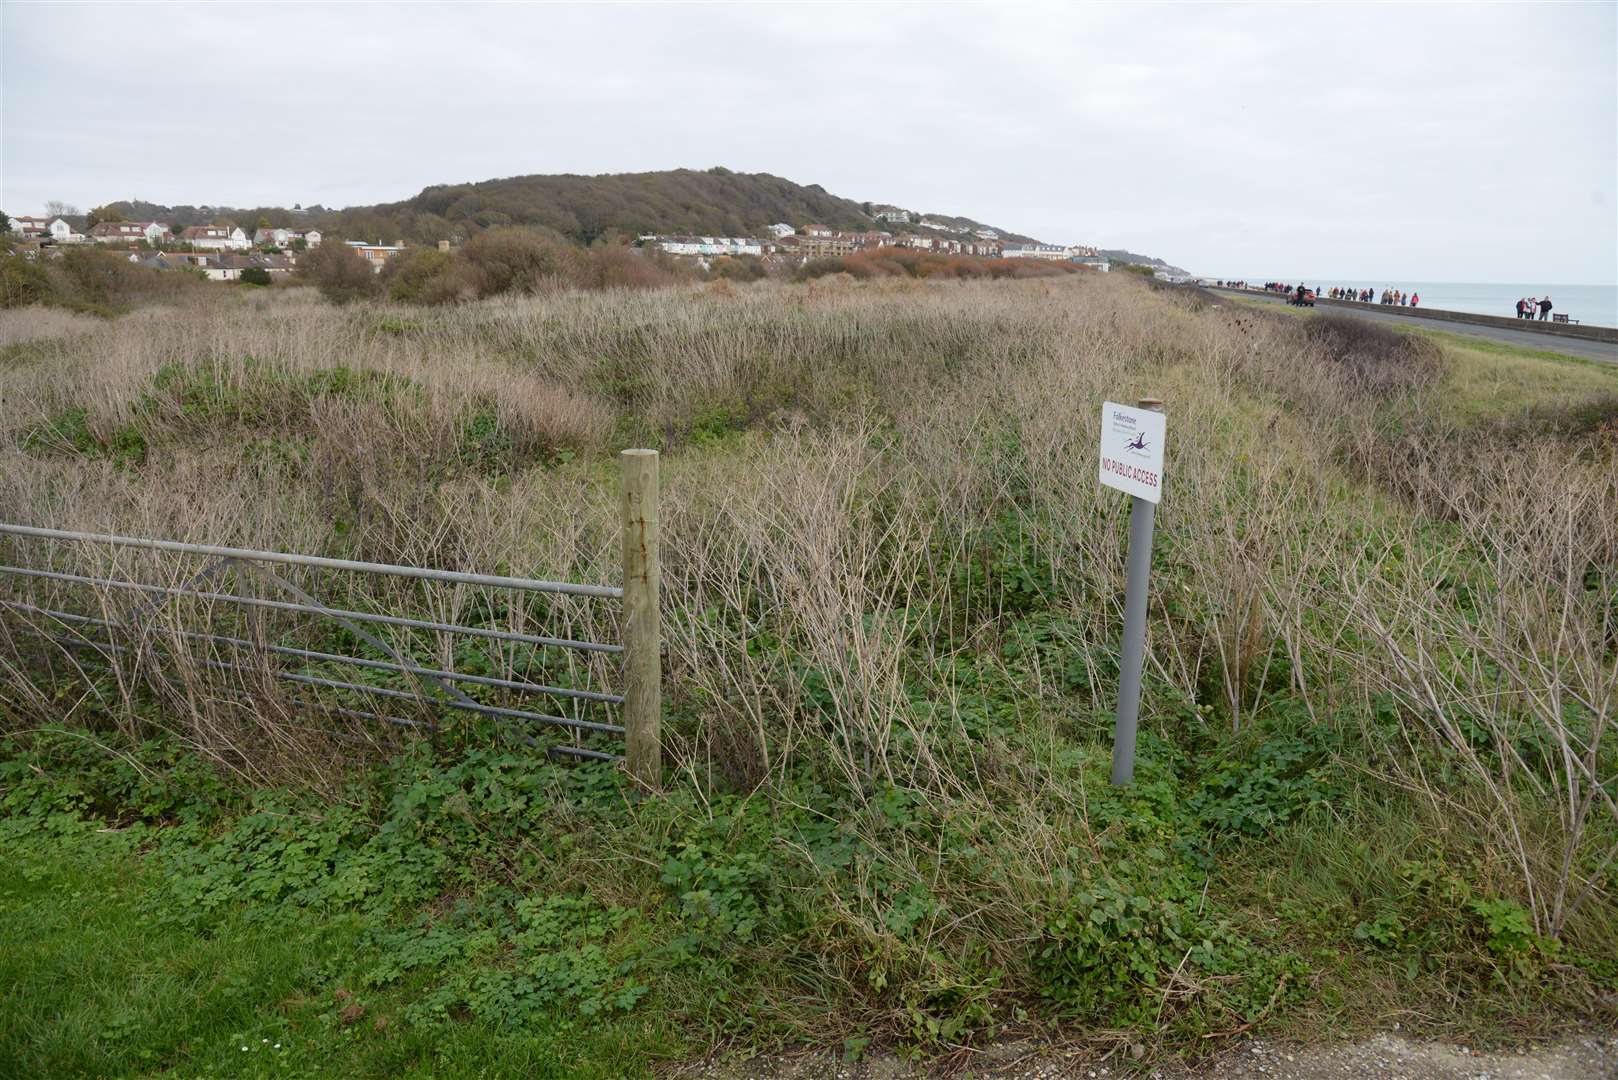 Land between the Royal Military Canal and the seafront, the site of proposed development along Princes Parade, Hythe. Picture: Chris Davey FM4975504 (3885790)